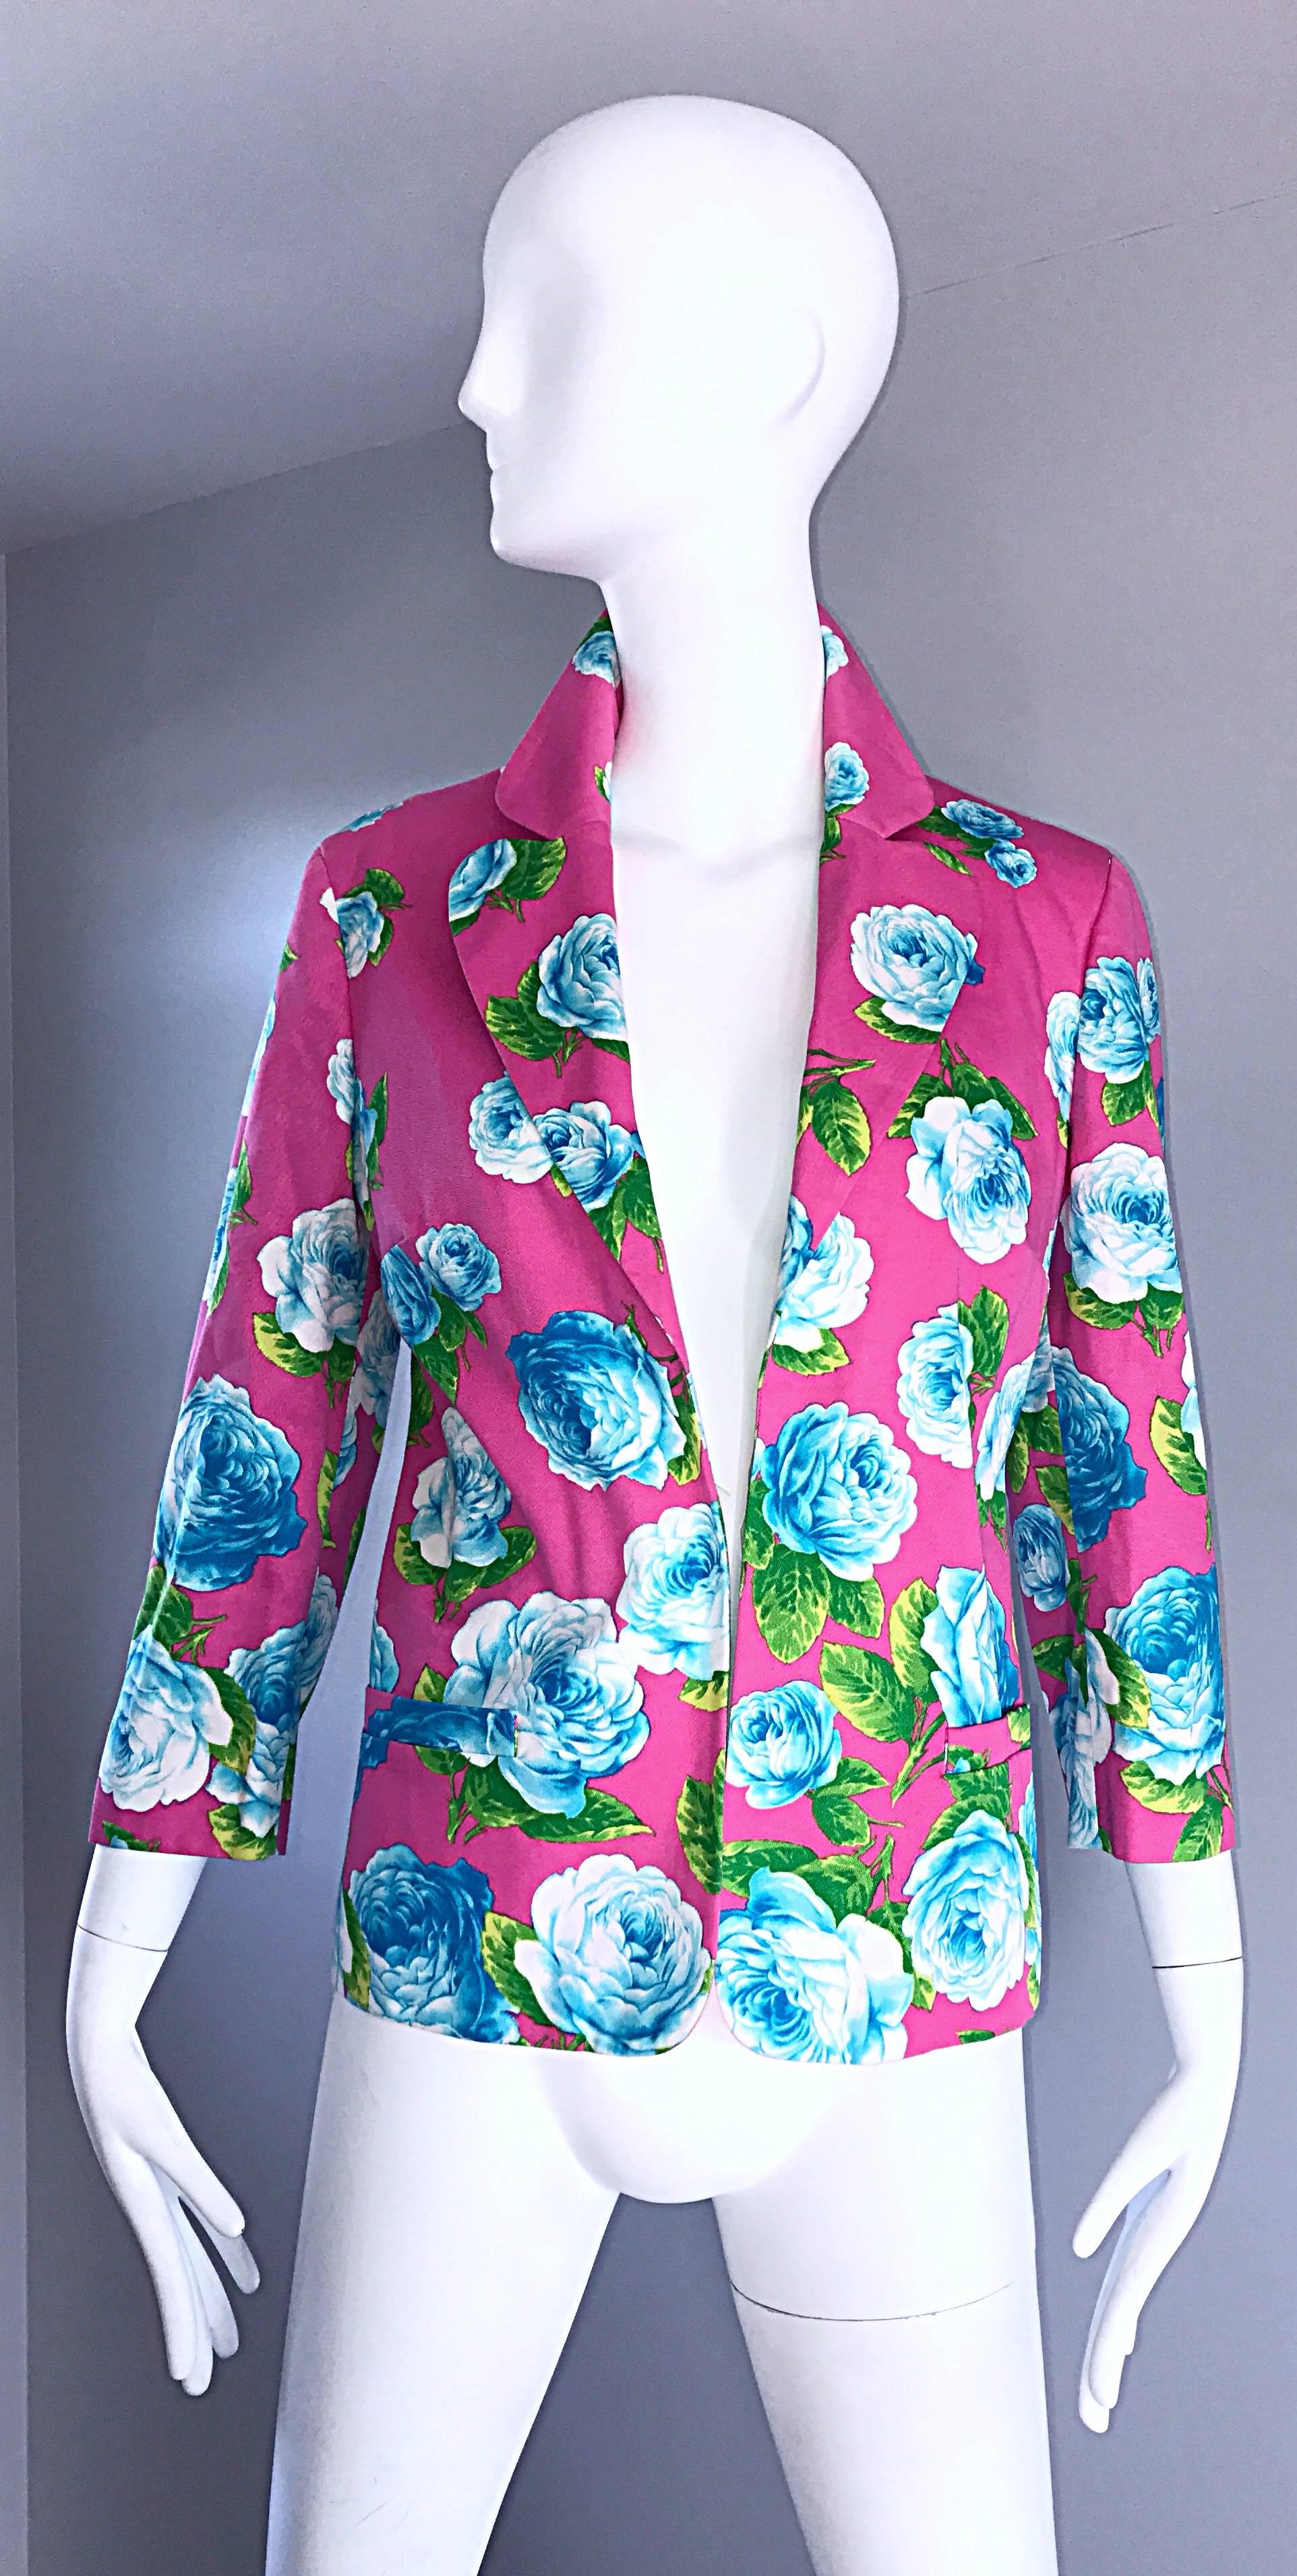 Chic early 1990s / 90s GIANNI VERSACE Versus fuchsia/ hot pink cotton blazer jacket! Features amazing blue and green rose print throughout. Great tailored bodice, with 3/4 length sleeves. Pocket at each side of the waist. Fully lined. Can easily be